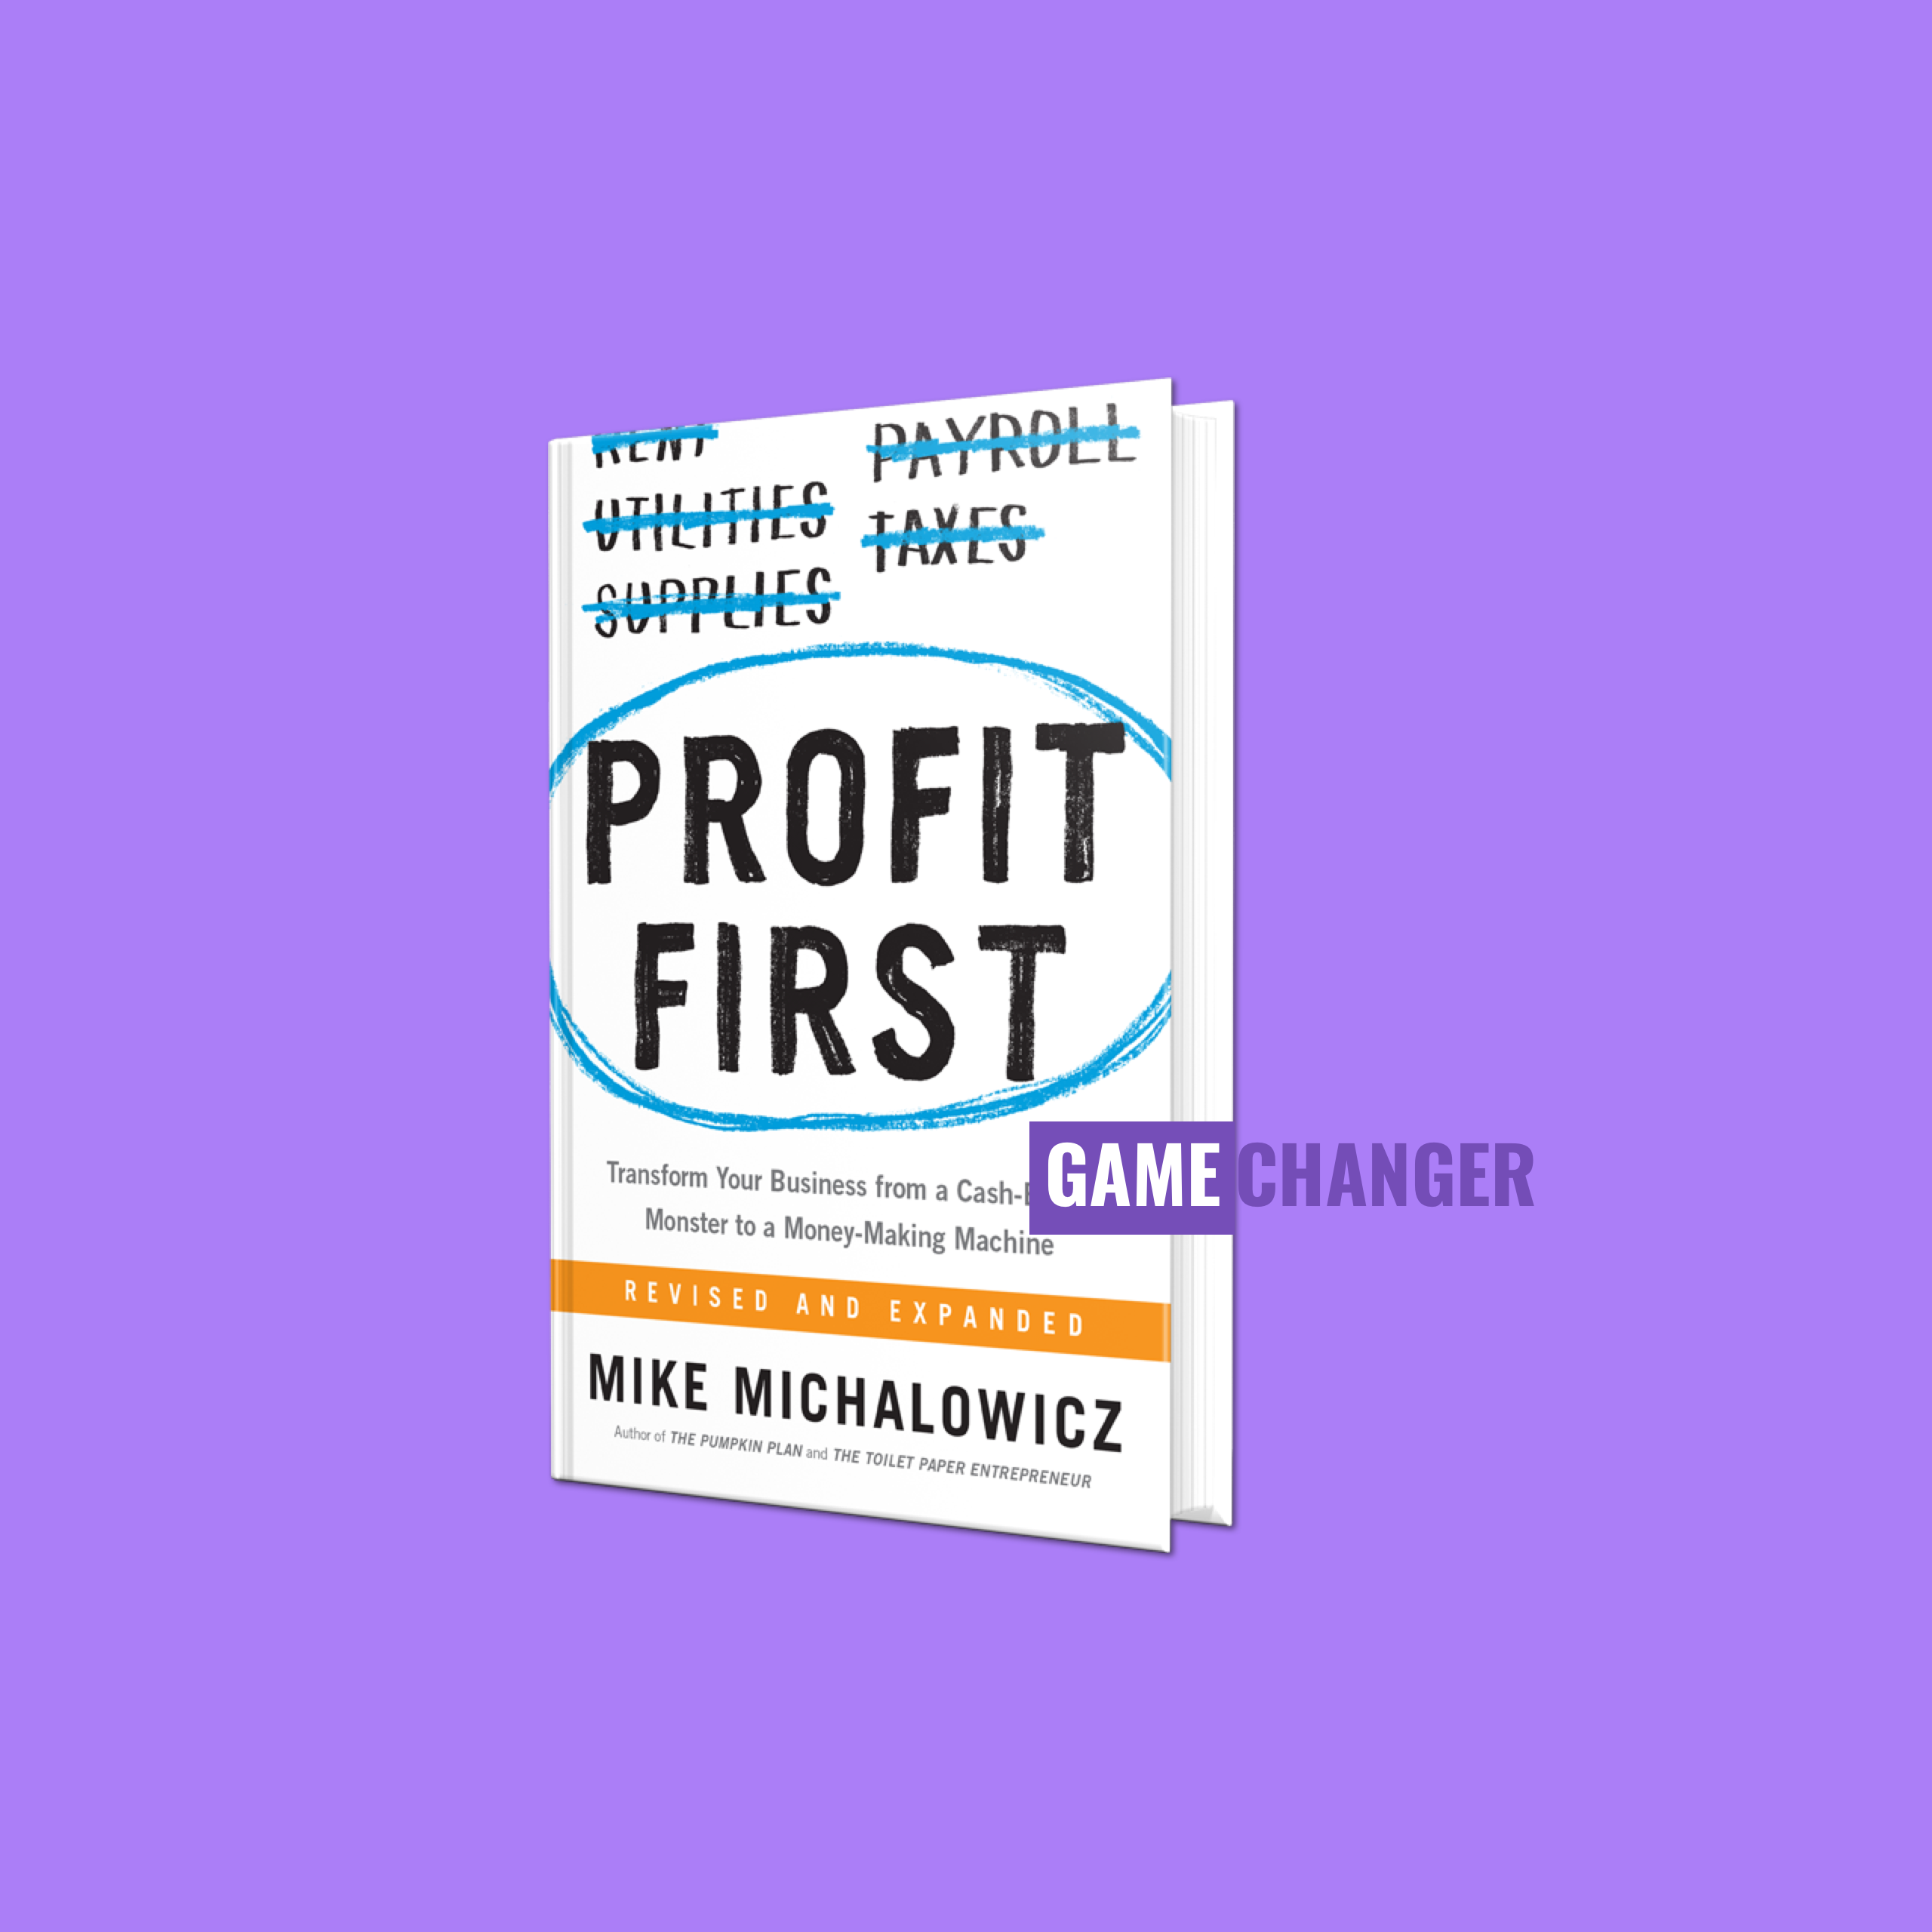 The Profit First book